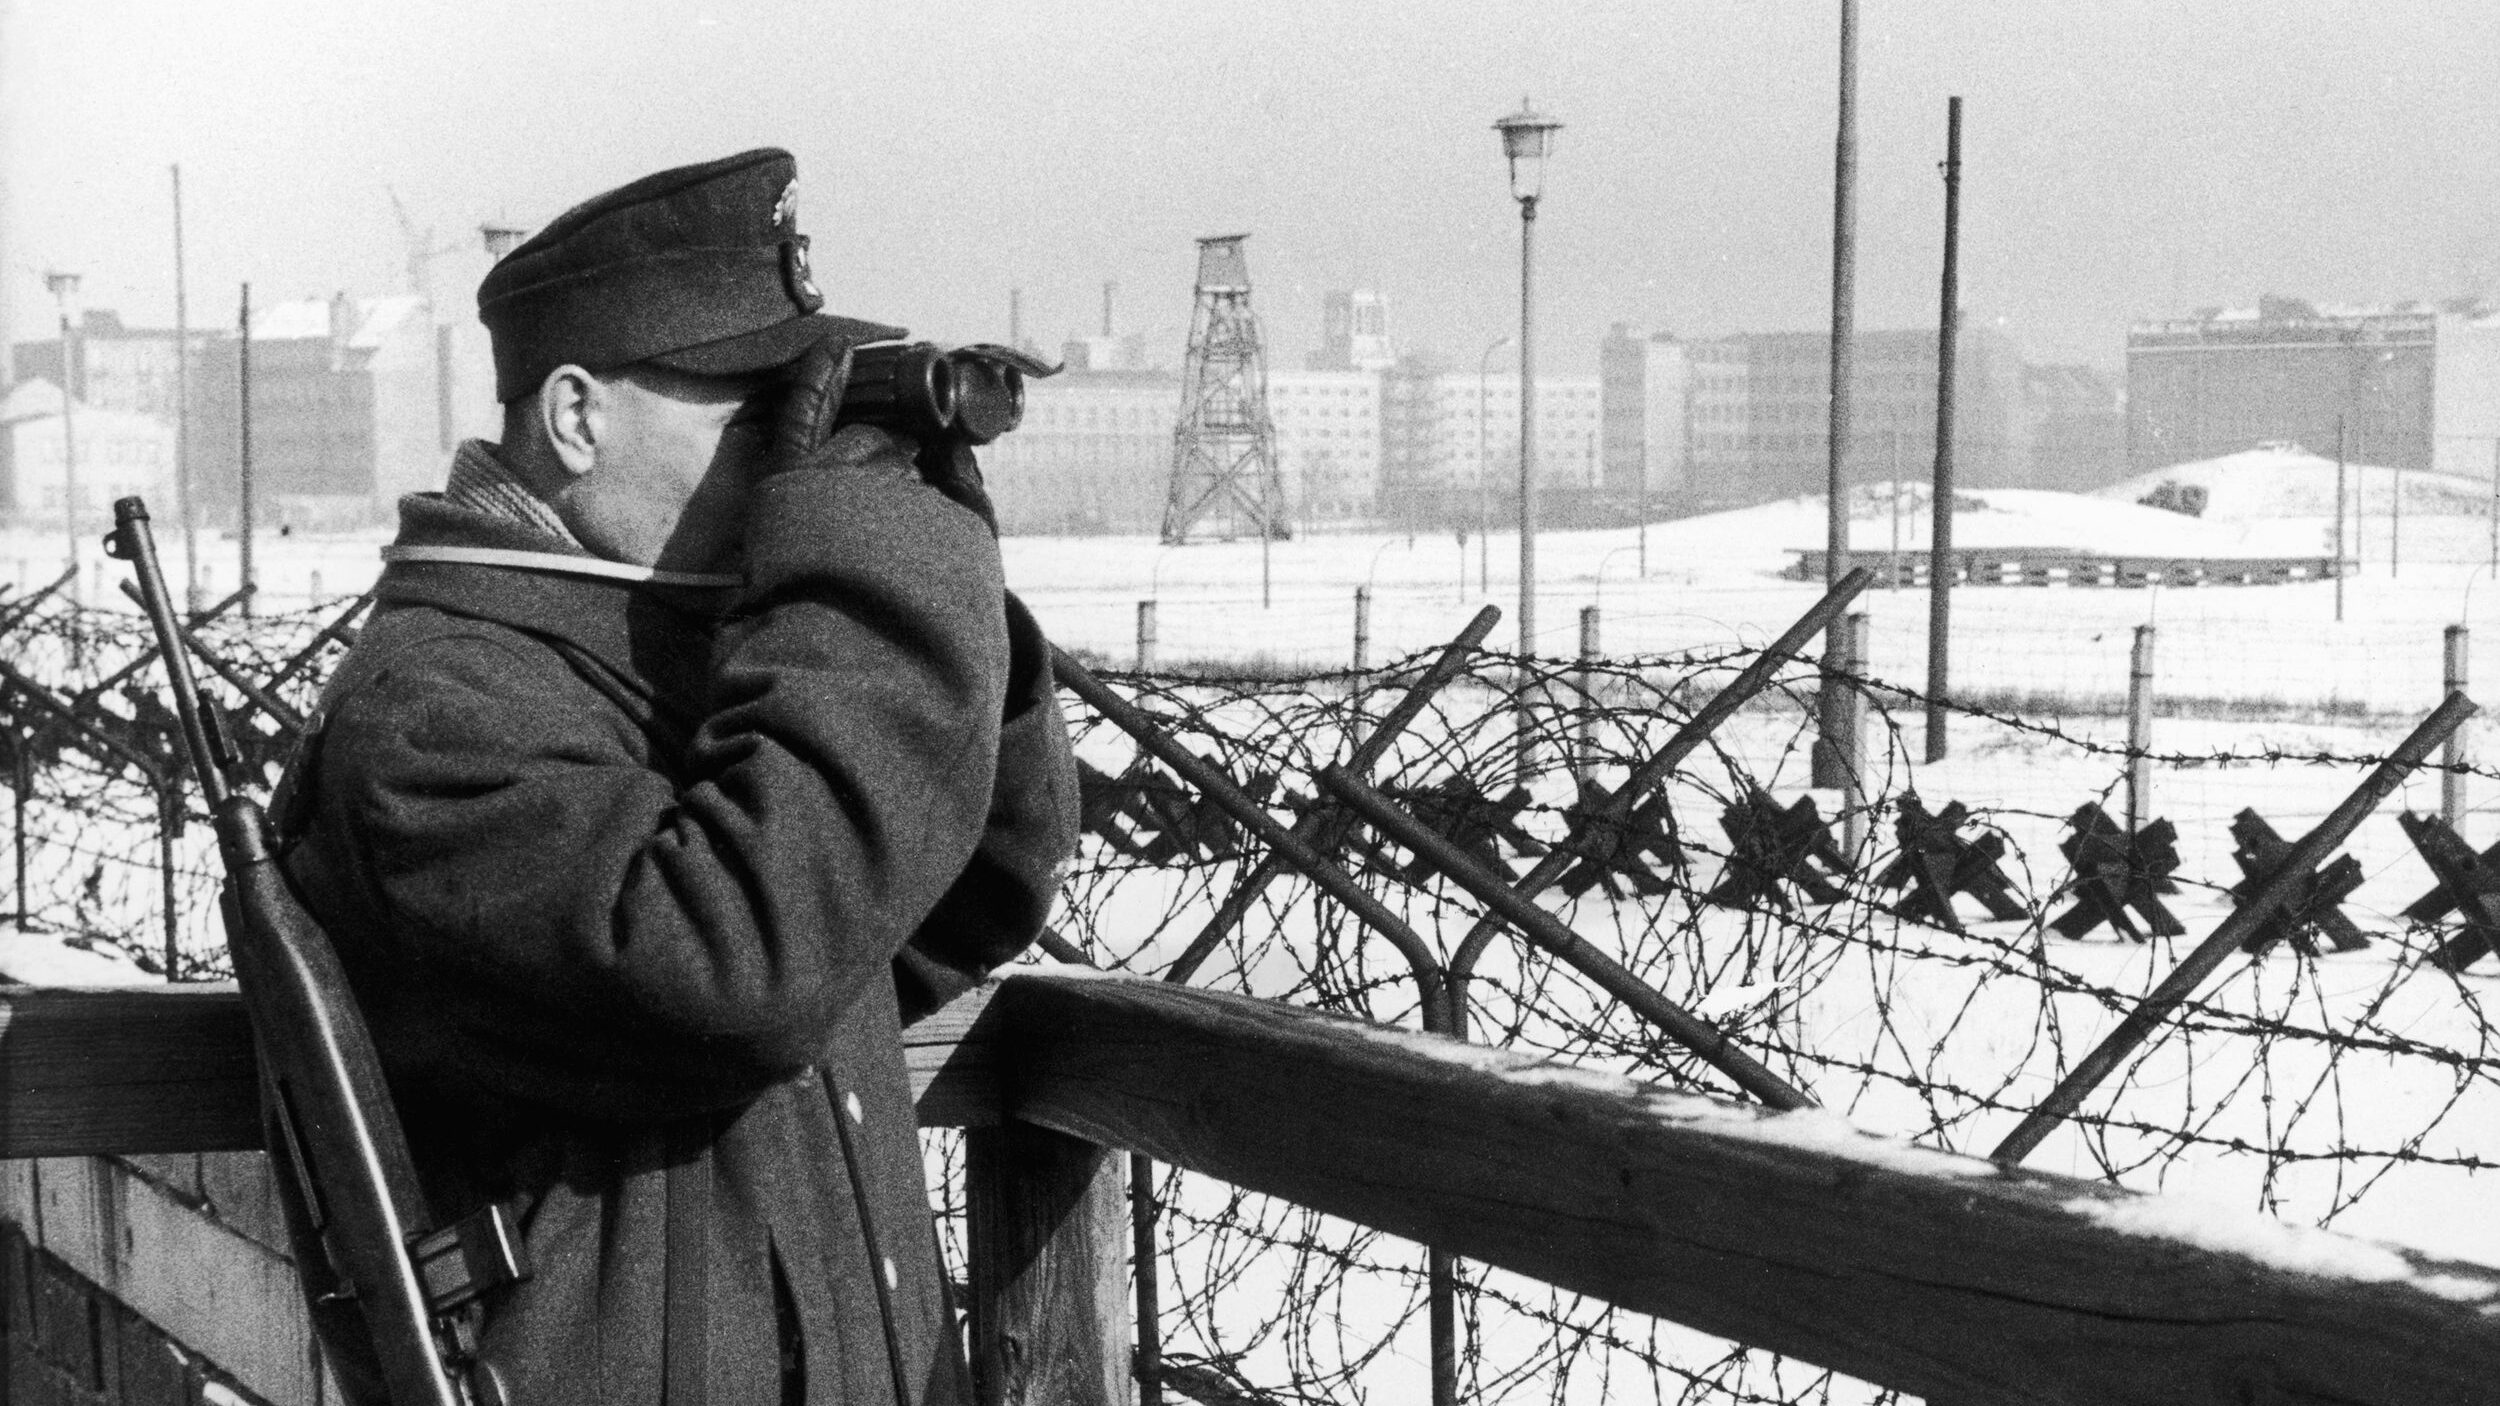 An armed West German policeman keeps a close watch on the East Zone across the Berlin Wall. The nearest mound of snow marks the remains of Adolf Hitler’s underground bunker.